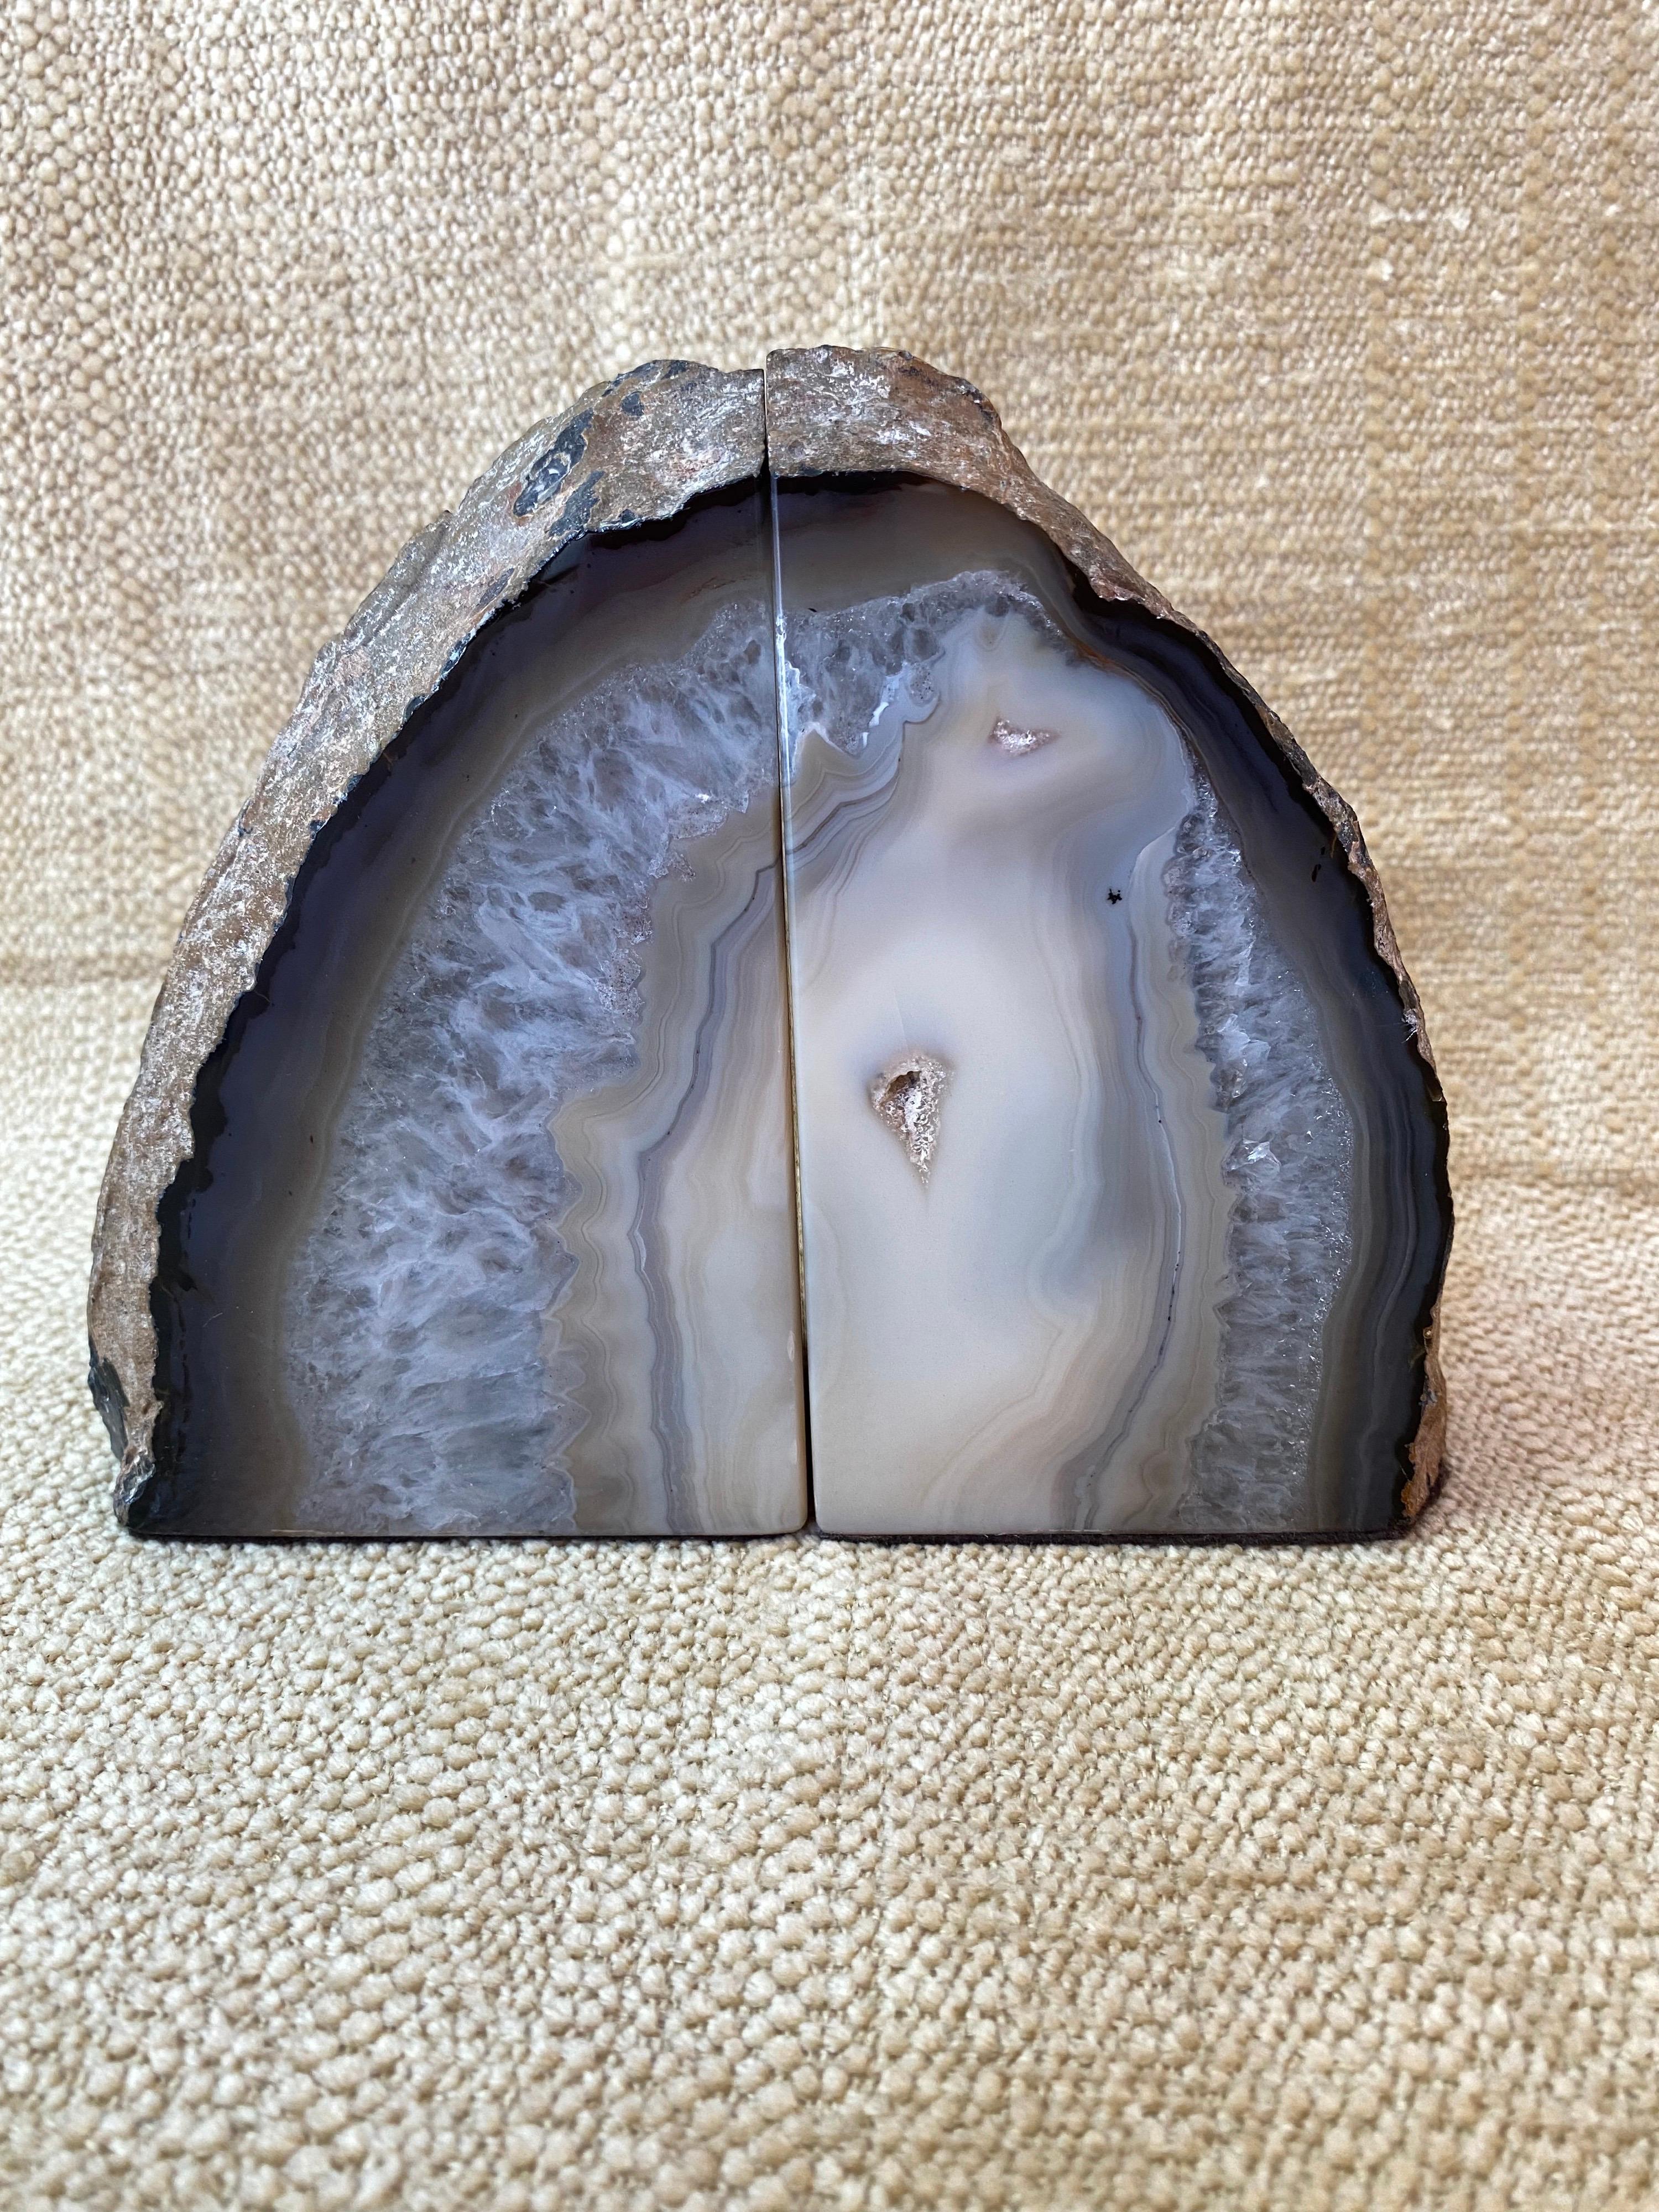 Polished Geode Bookends, nice color to each! Great size and scale! Rough outer Shells with Polished Fronts.